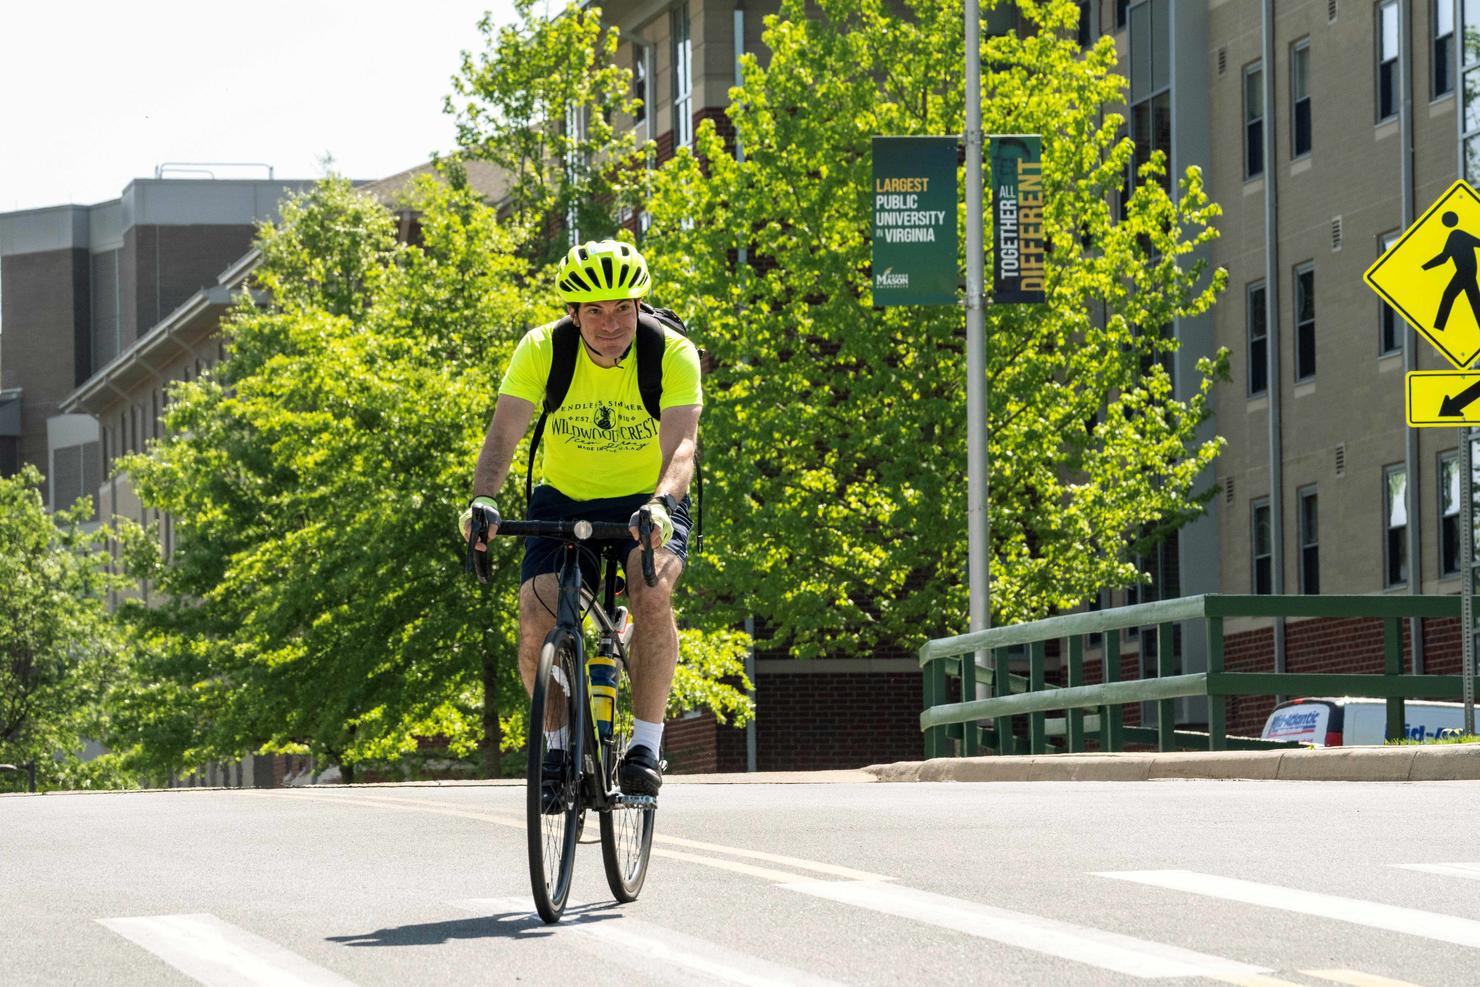 Kenneth Strazzeri rides his bike on the Fairfax Campus of George Mason University. The background includes a brick building and a light pole banner that says Largest Public University in Virginia, and All Together Different